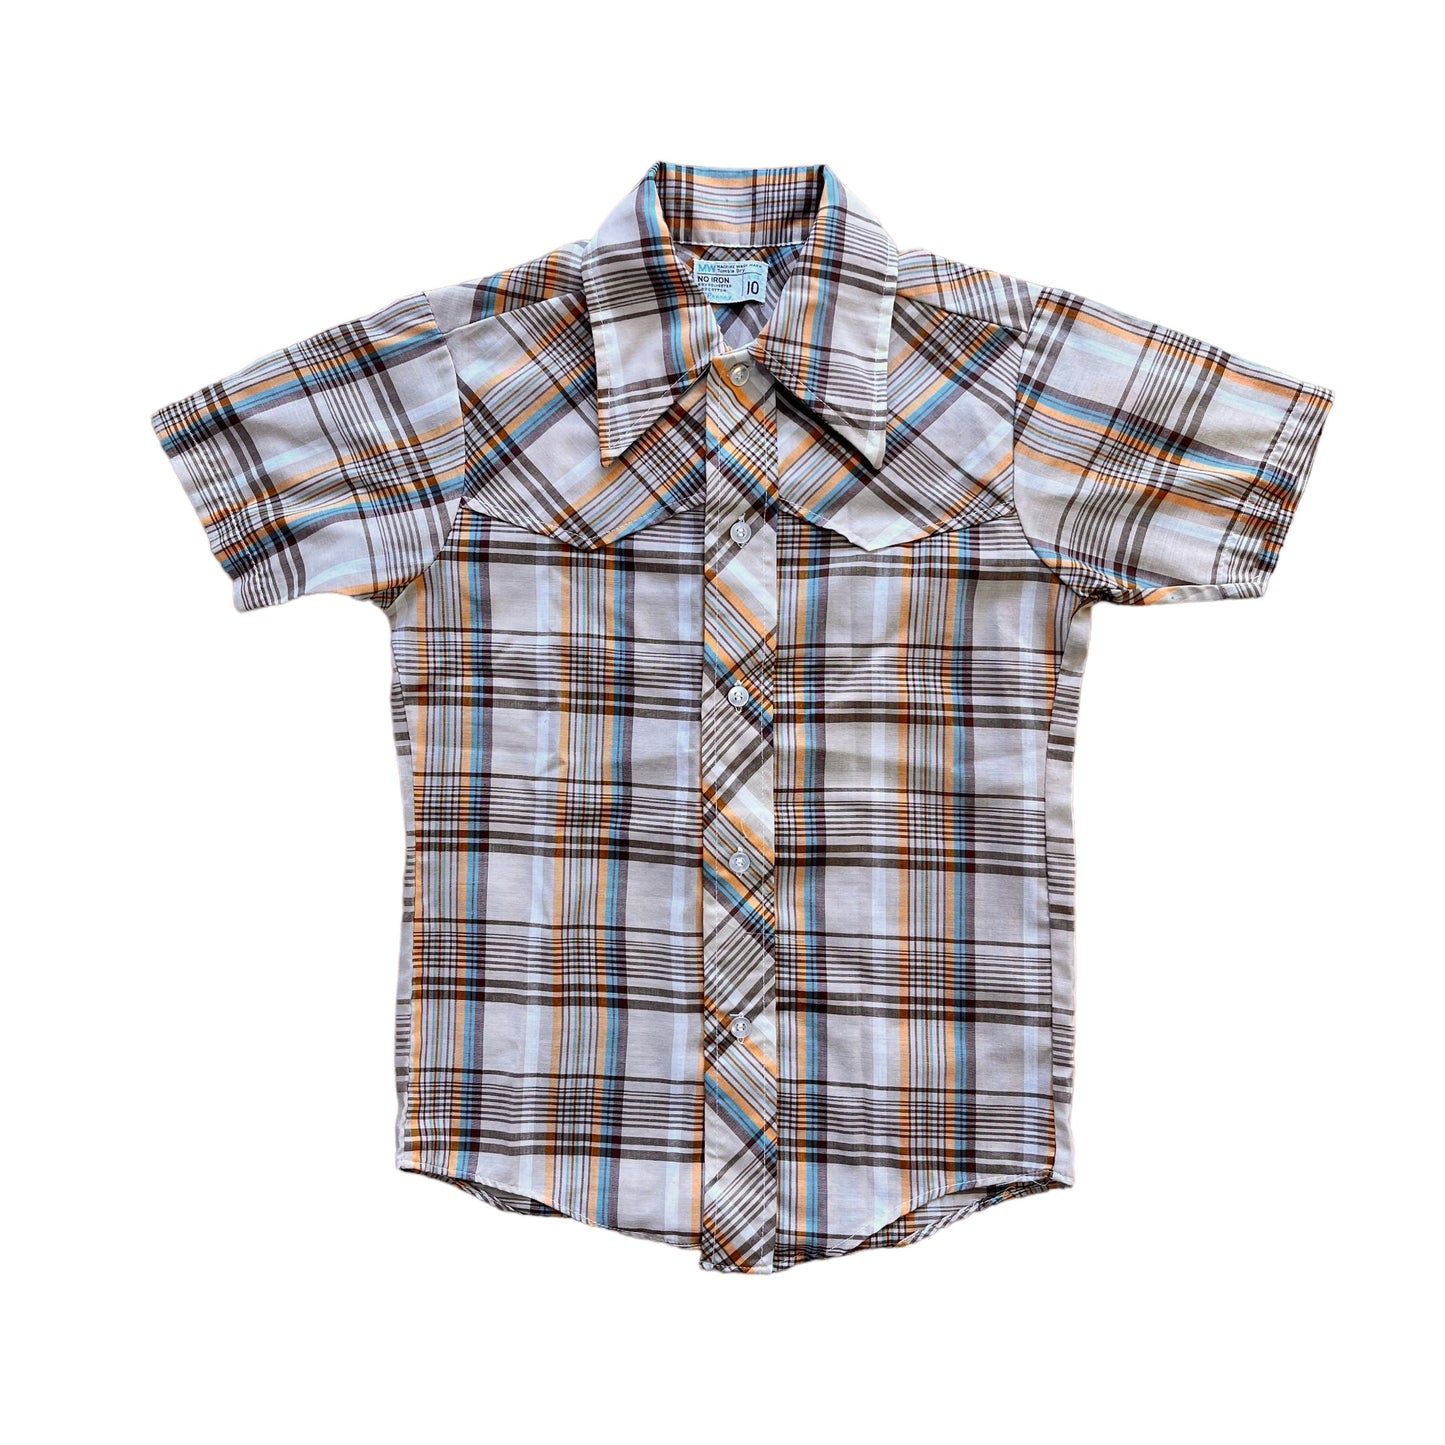 Vintage 1970s Brown Checked Shirt  8-10 Years